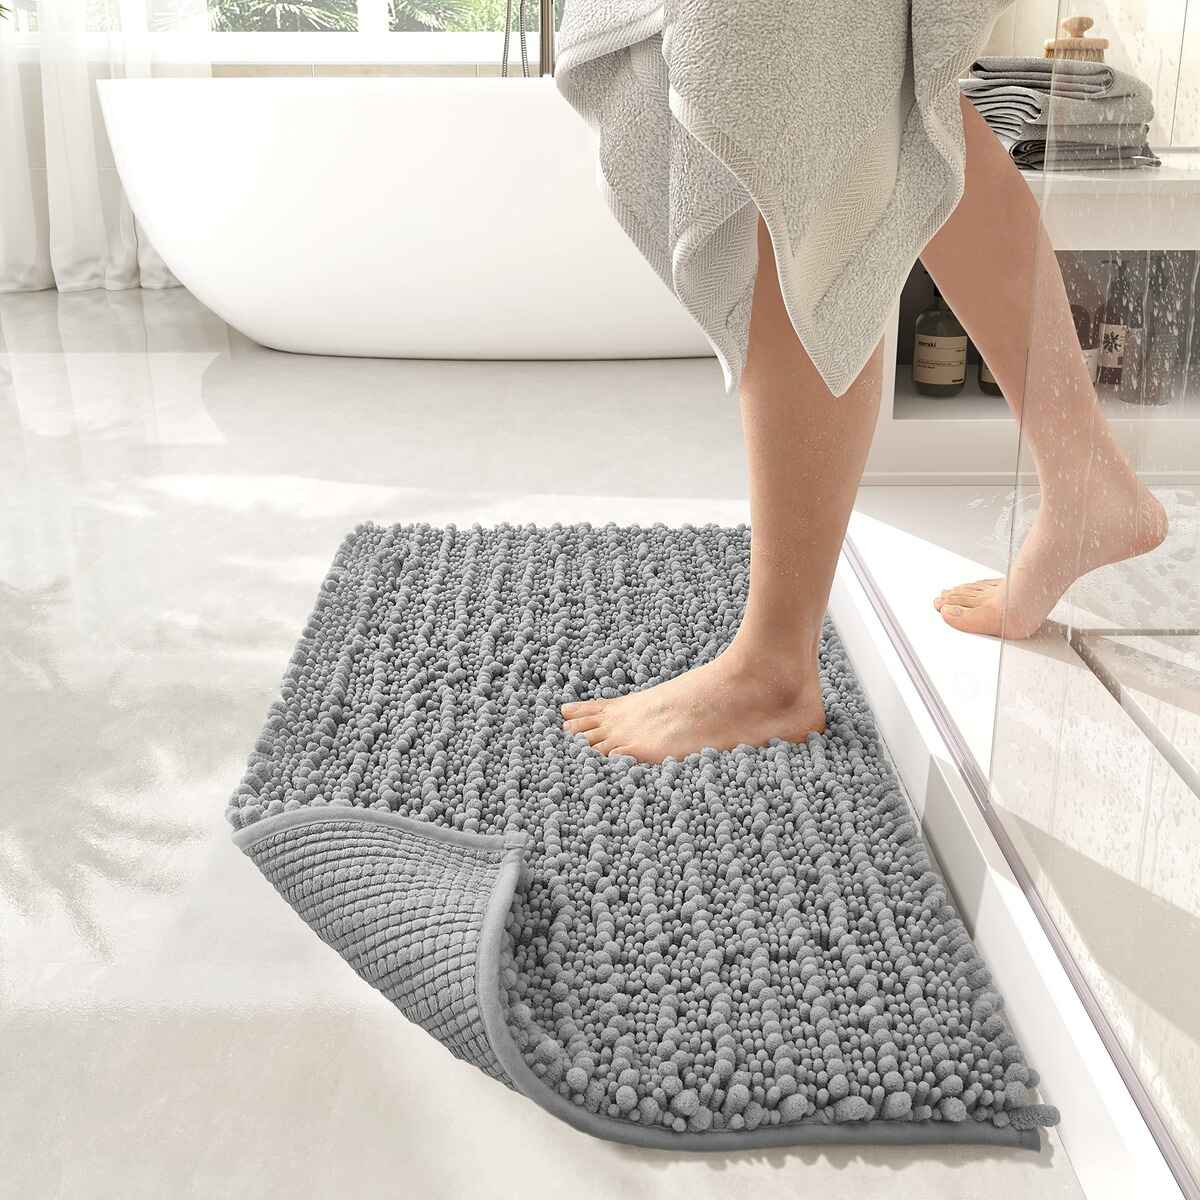 SONORO KATE Bathroom Rug Review: I Tried It